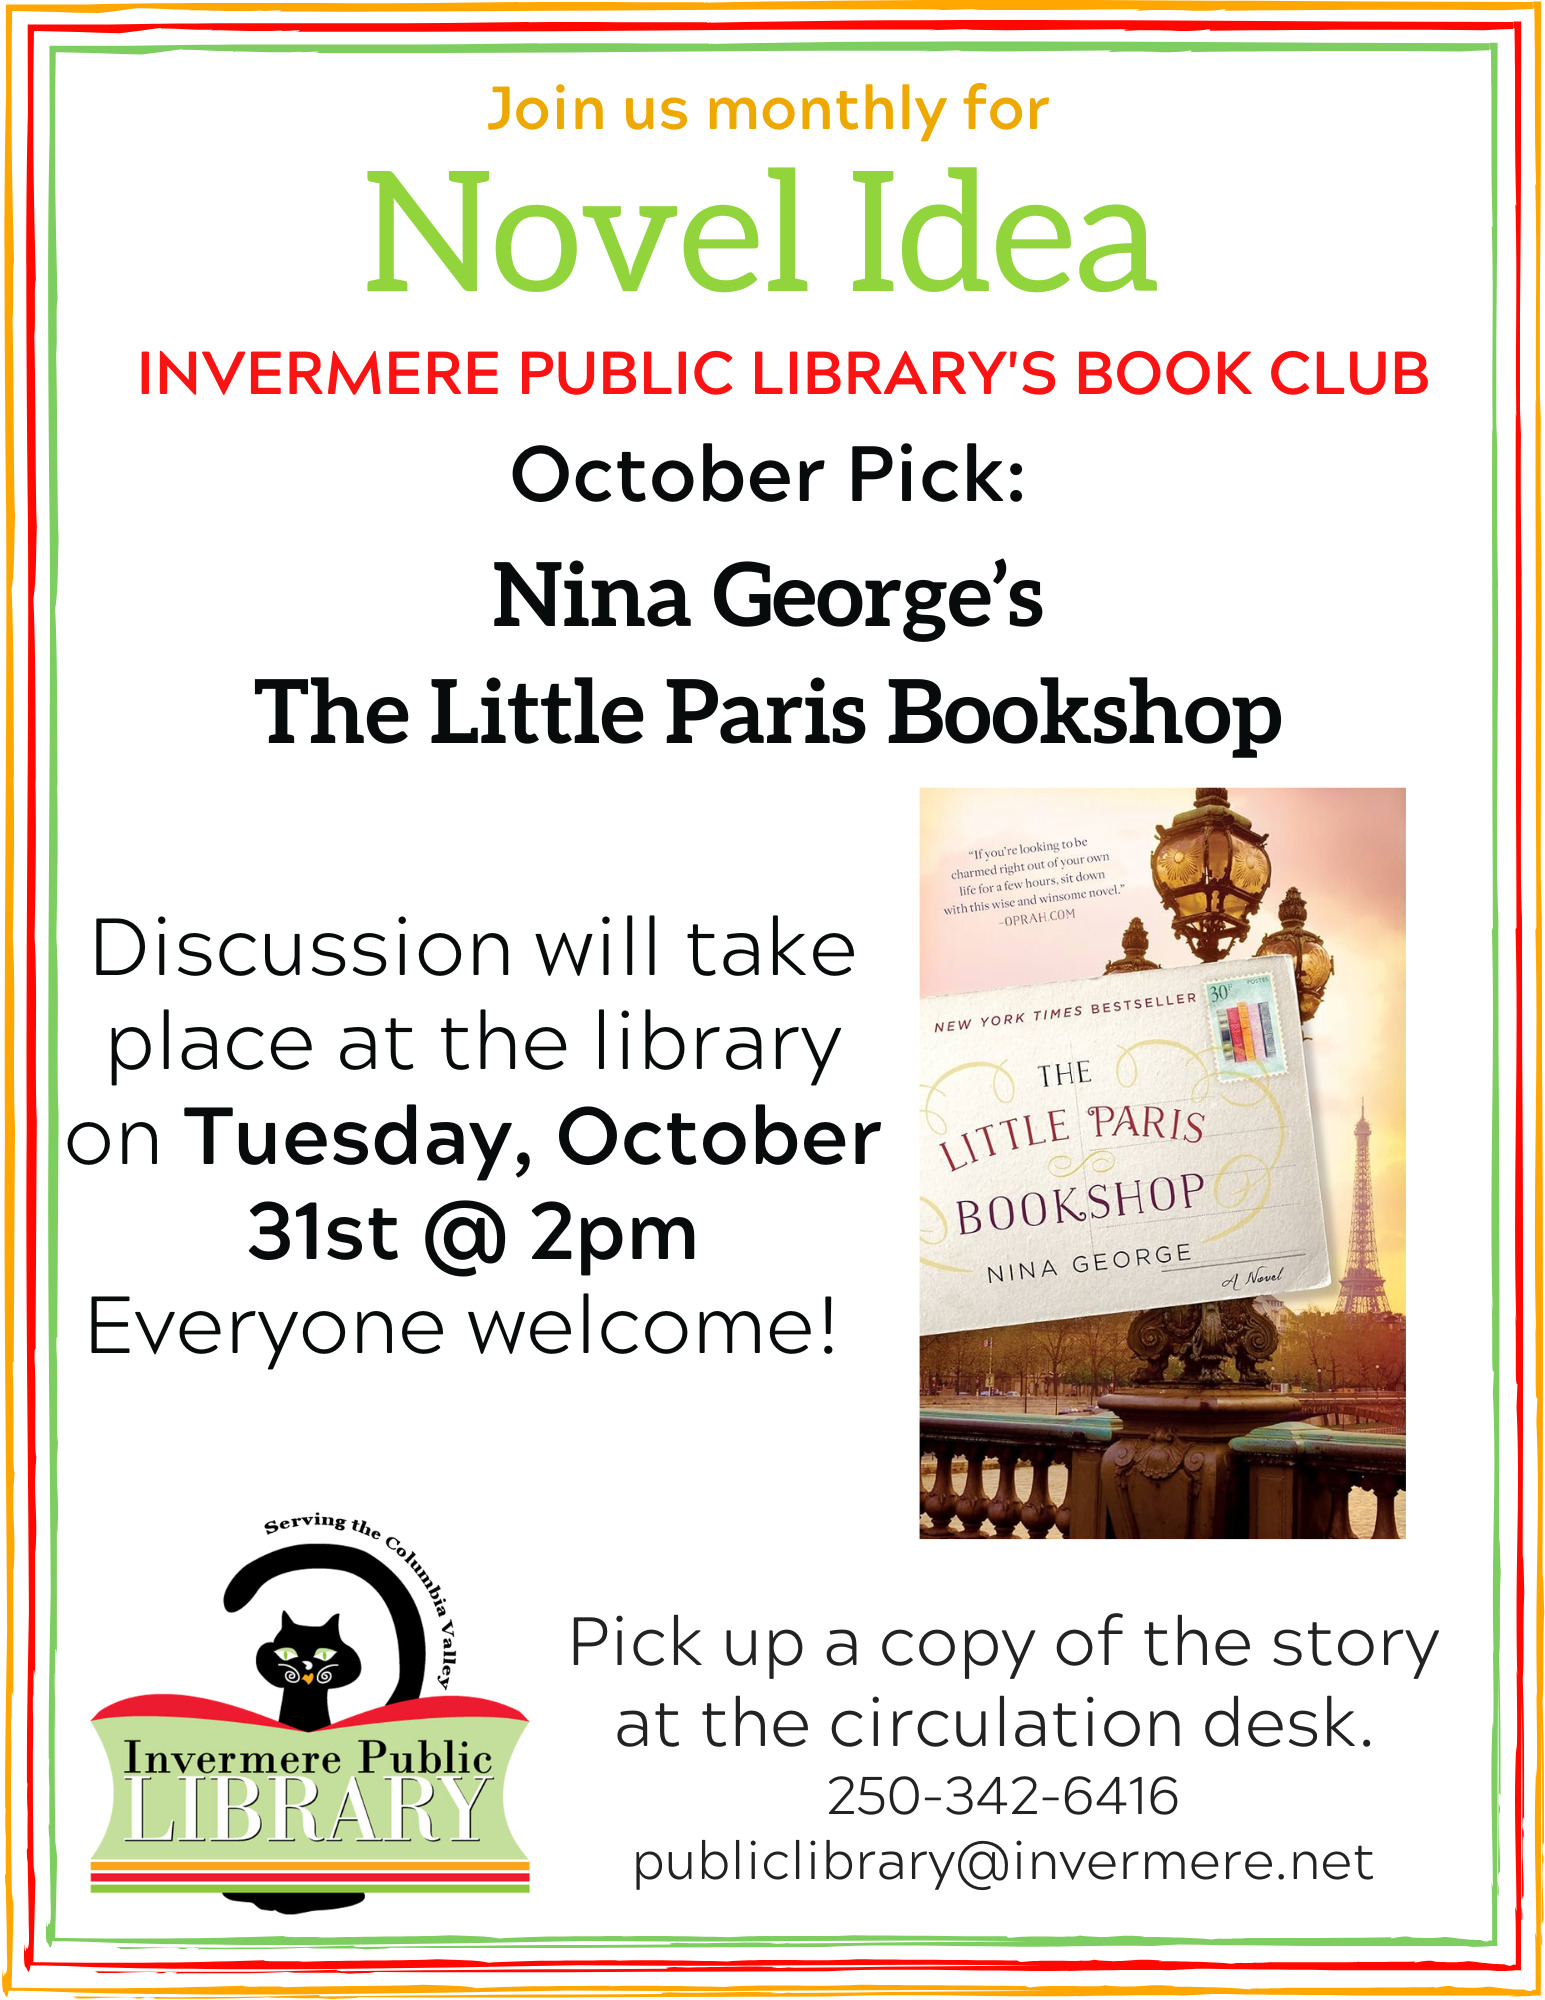 Provides title, author, and meeting details for this month's Novel Idea book club. Details are in the event description